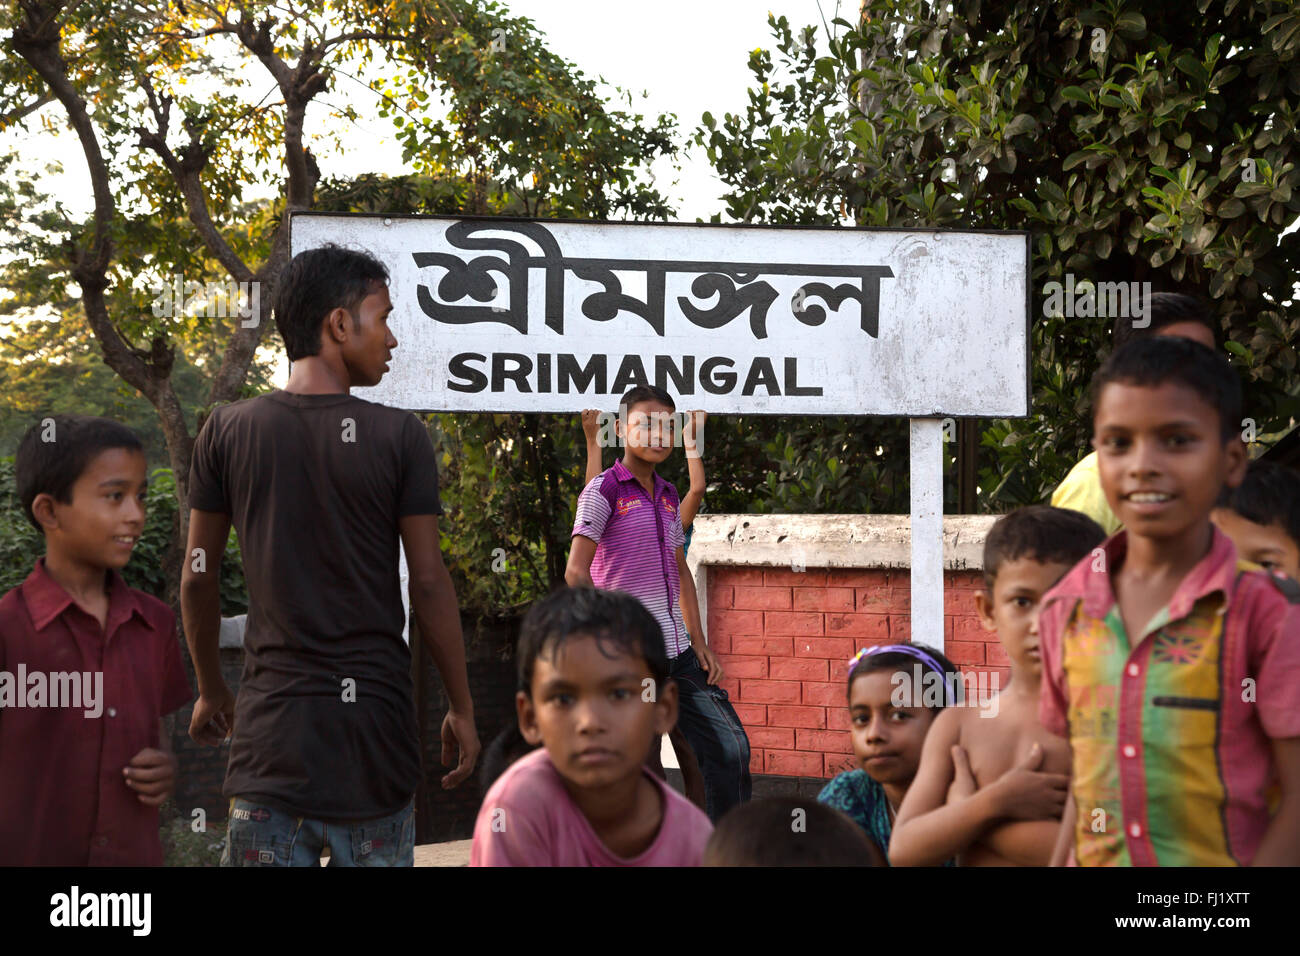 A group of kids stand at Sreemangal railway station in front of board 'Srimangal' in bengali language, Bangladesh Stock Photo